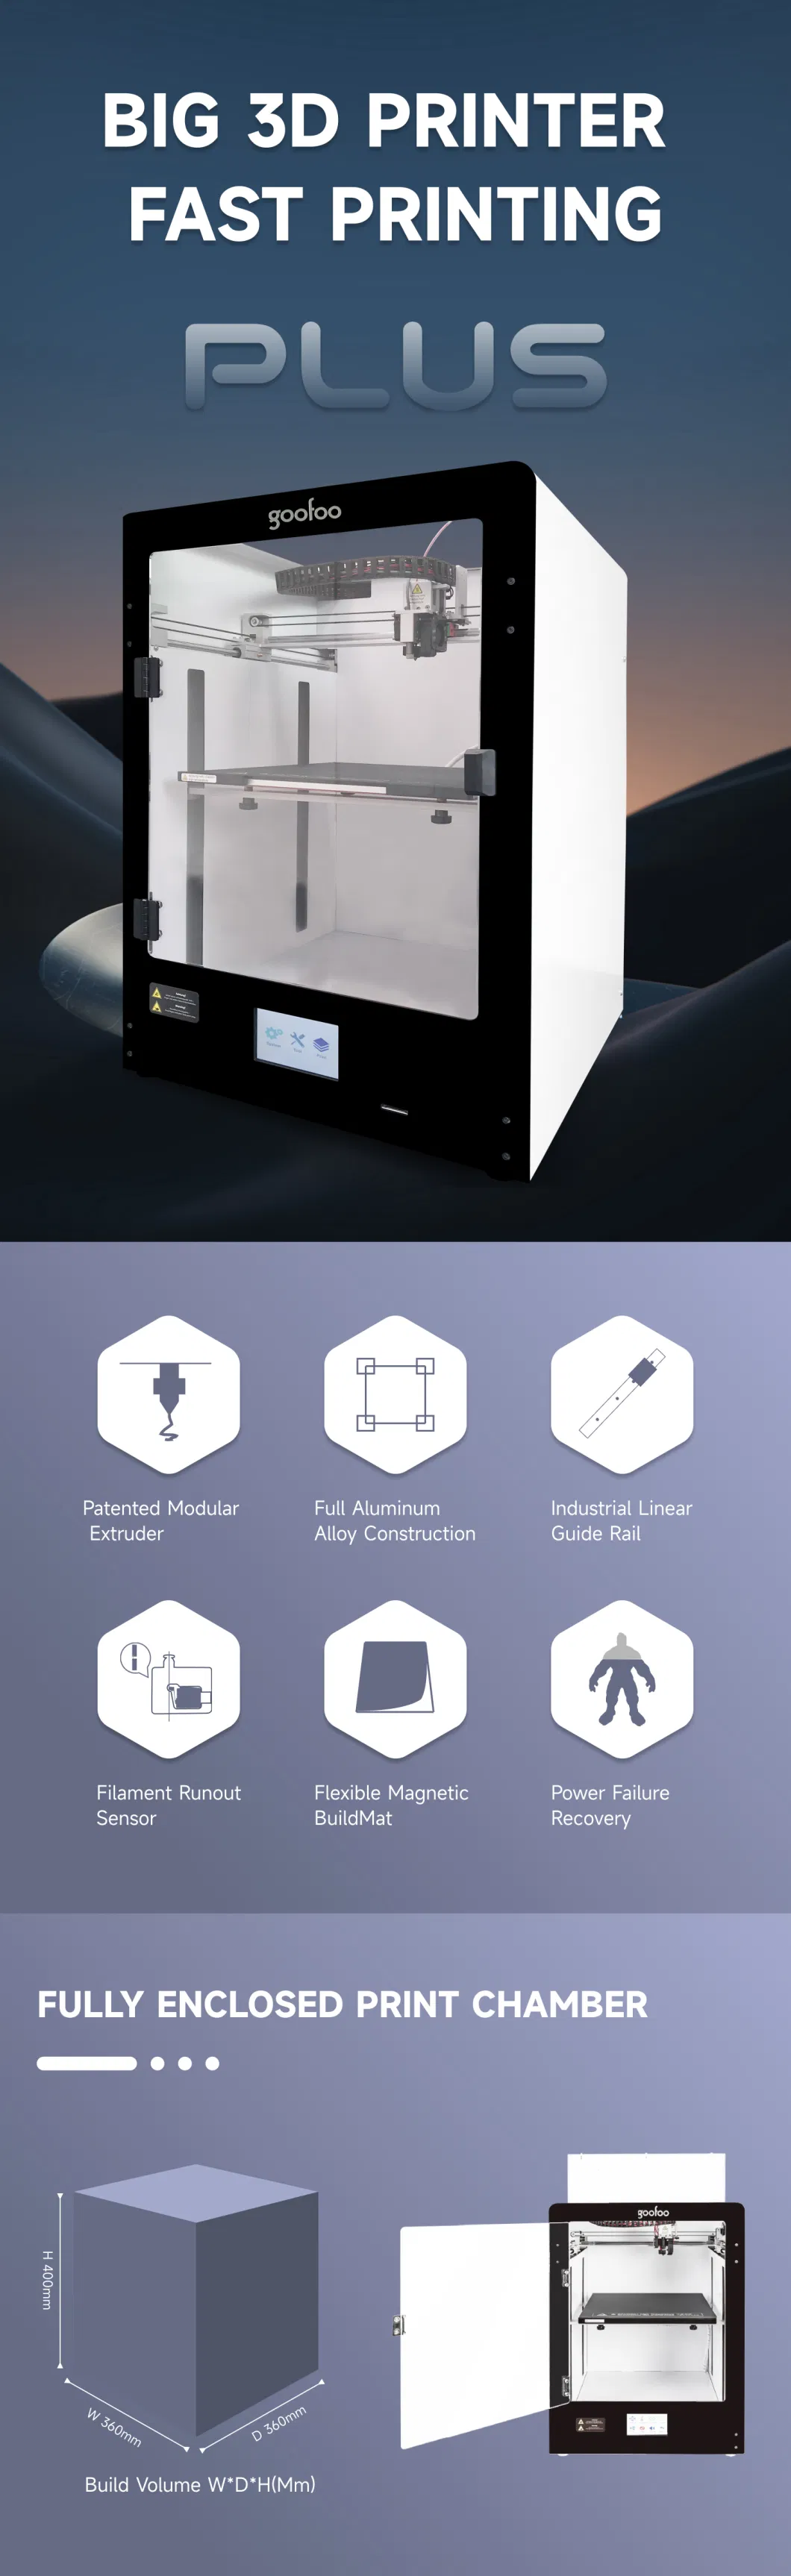 Rapid Prototyping Industrial Level 3D Printer of Auto Leveling and WiFi Connectivity